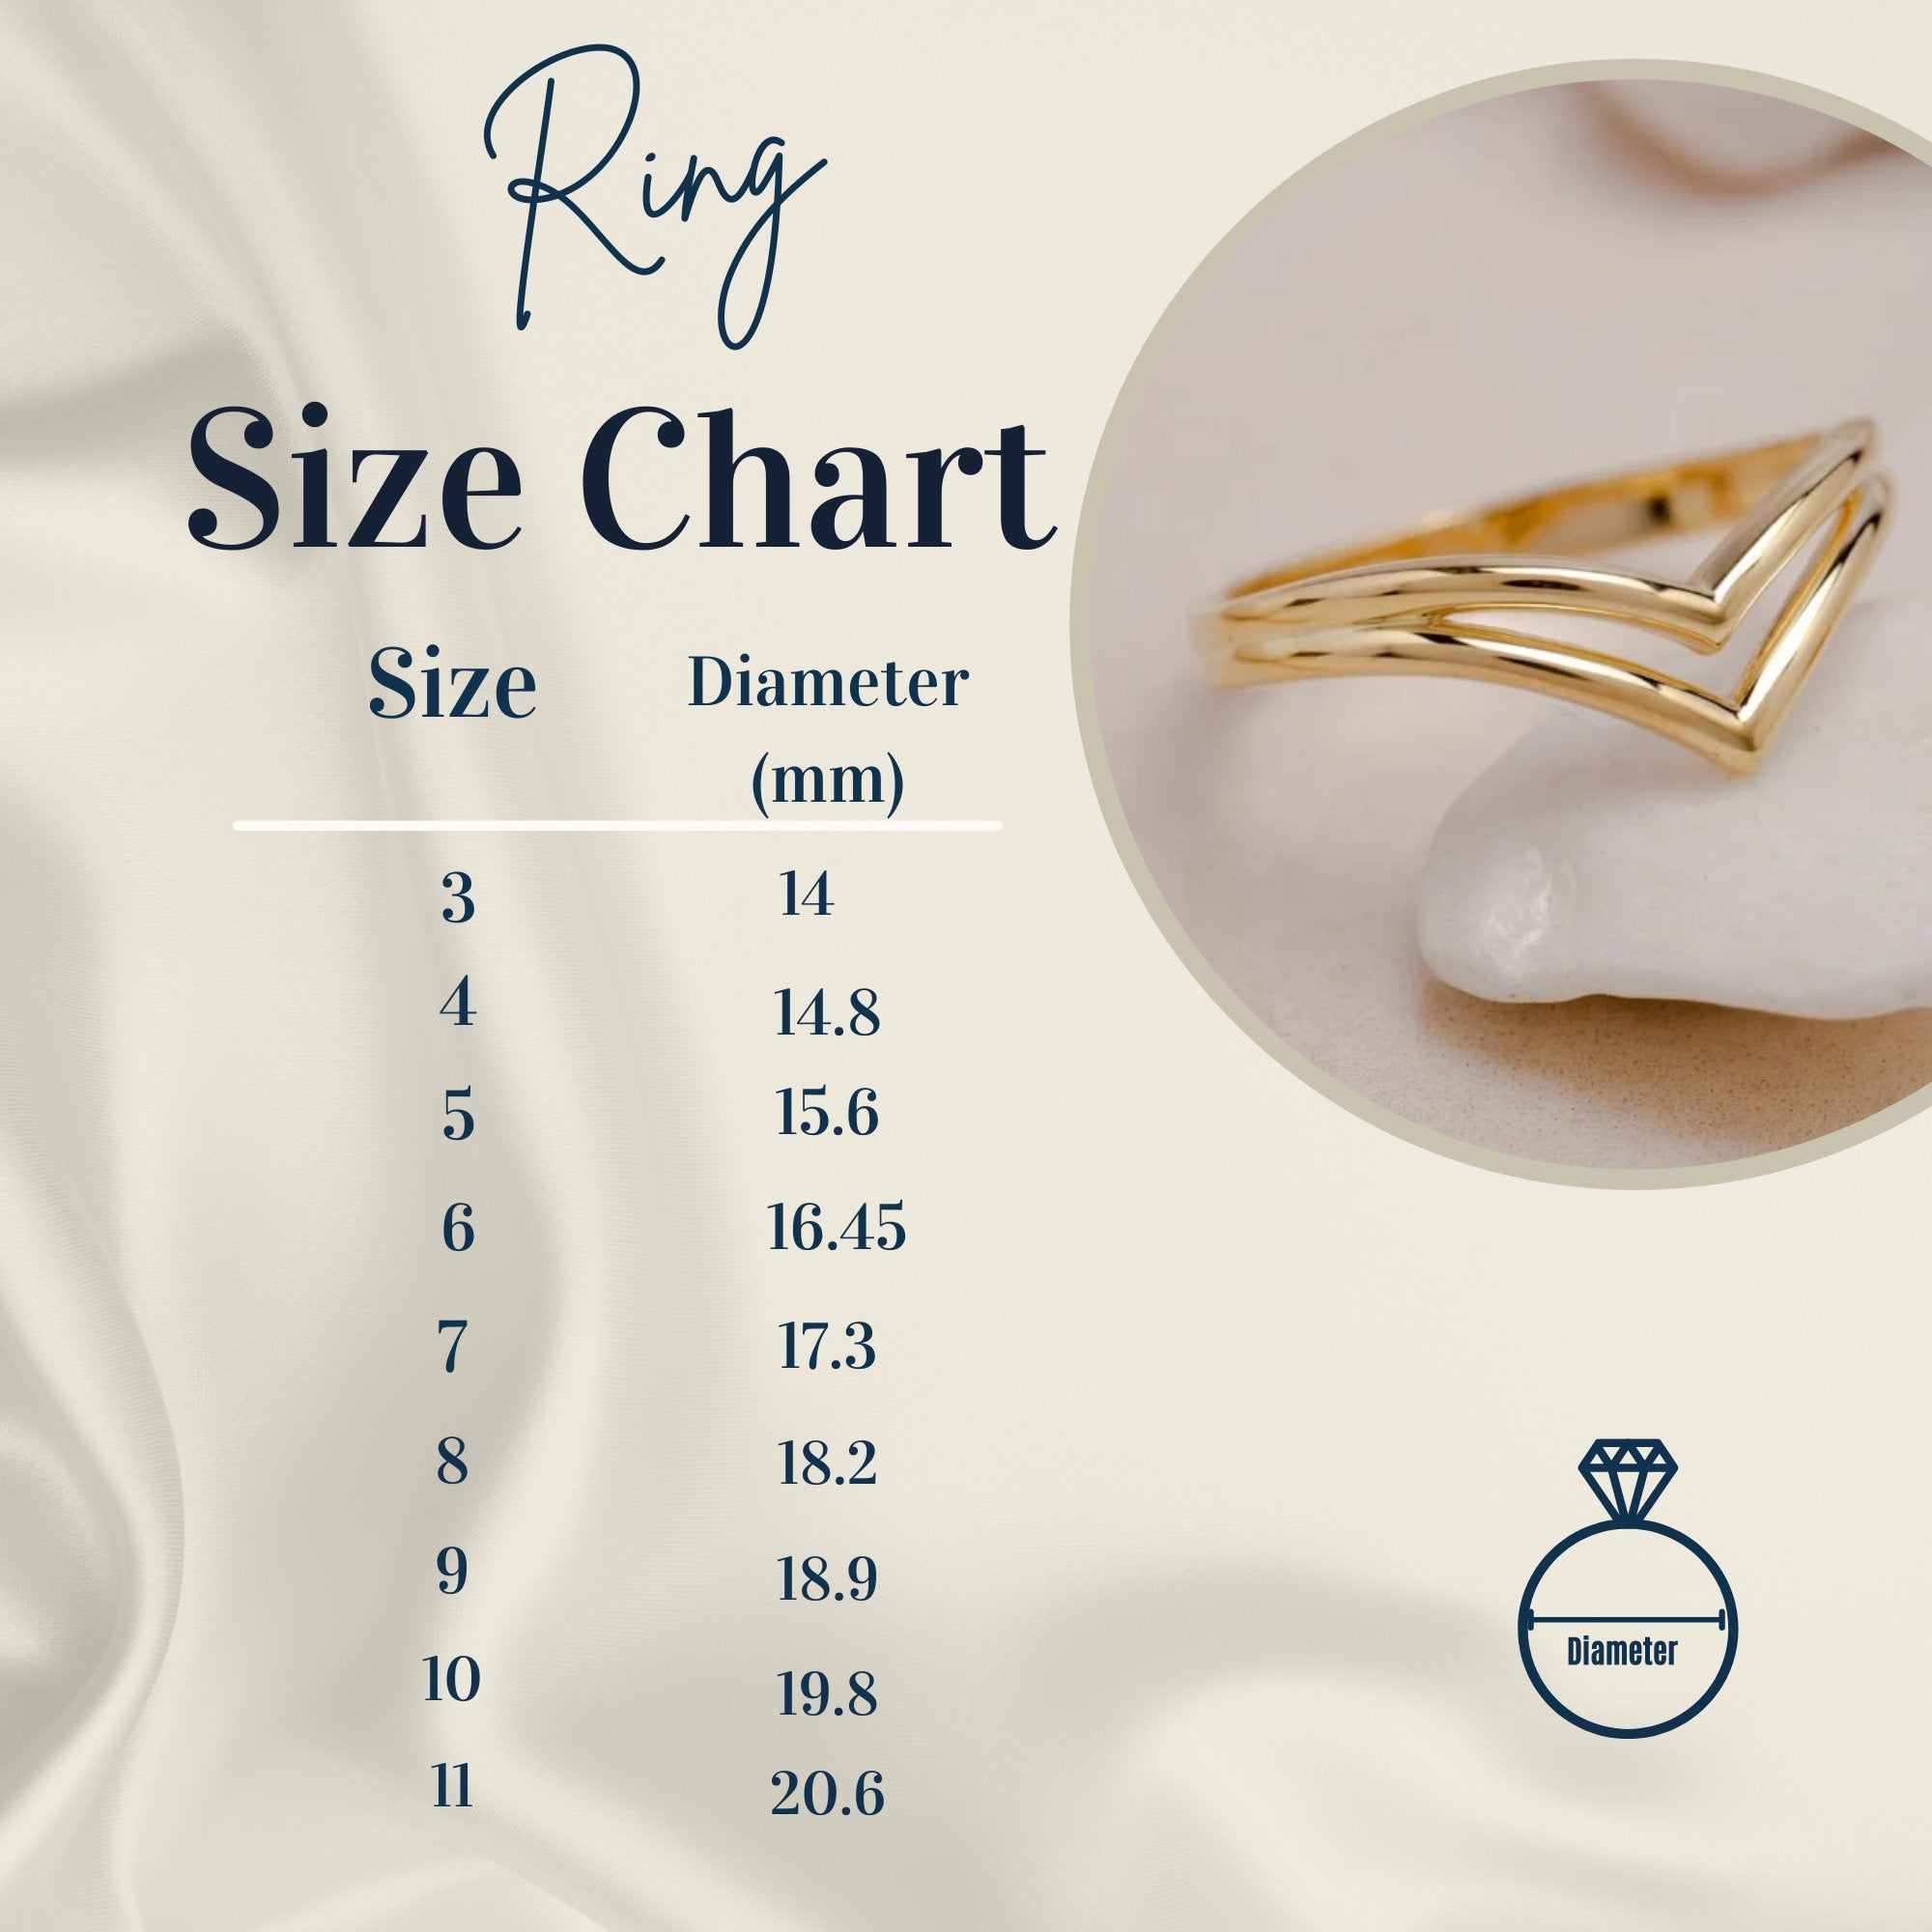 Jewelry 14k Gold Heartbeat Ring, 925 Sterling Silver Rhythm Heartbeat Promise Ring, Heartbeat Pattern Ring for Women, Heart Rhythm Ring